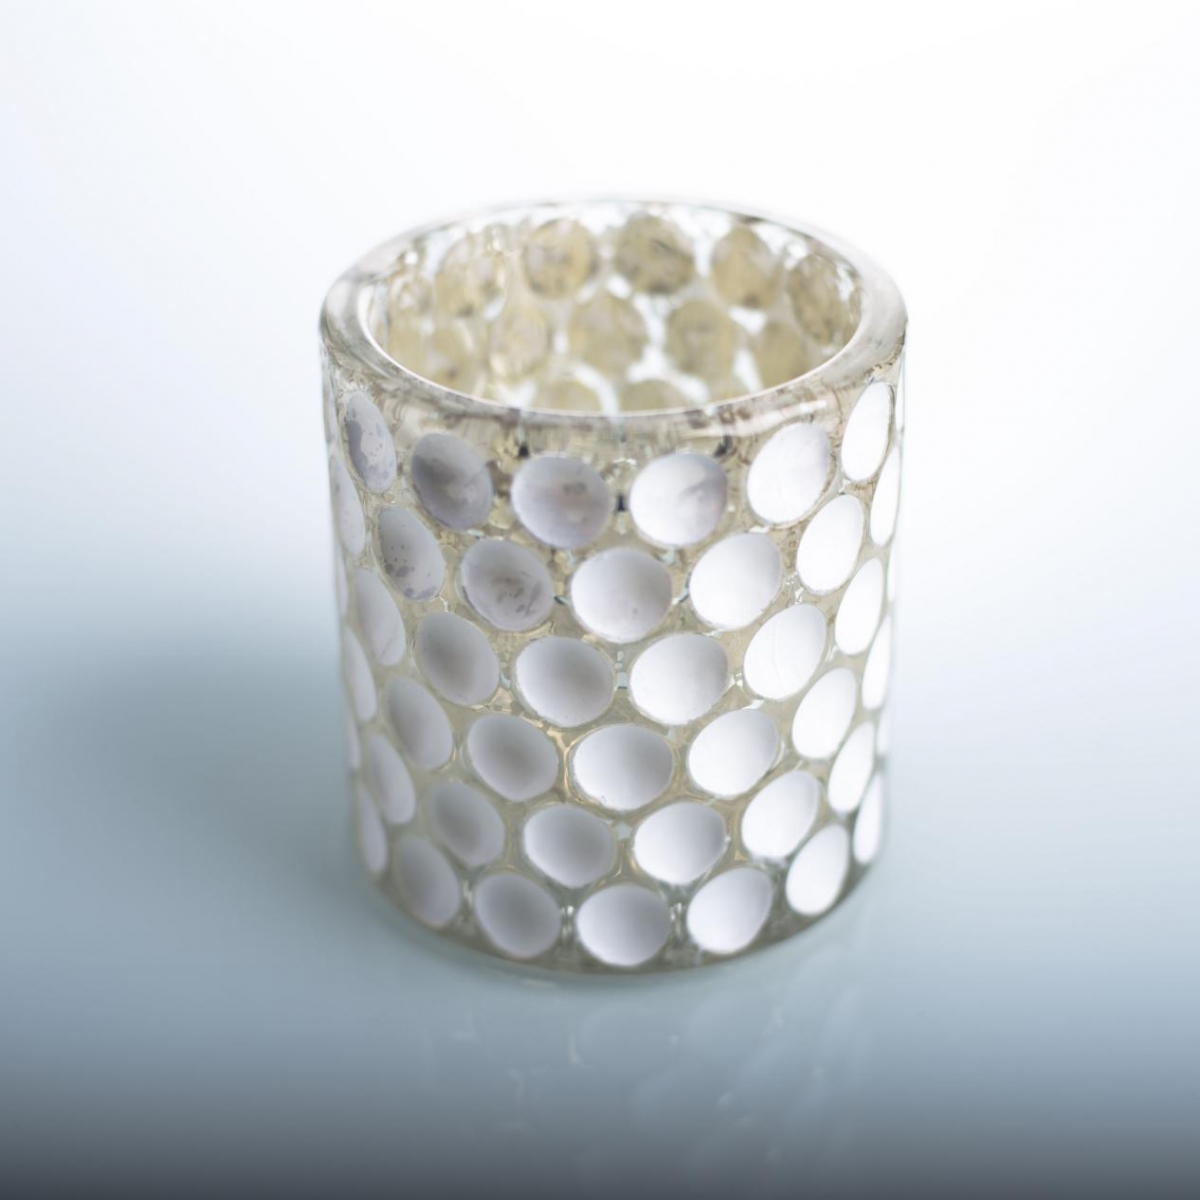 Glass Candle Holder ：White Honeycomb ,Embossing Dot ,Silver Electroplate ,Christmas Home Decoration ,China Factory Price-HOWCANDLE-Candles,Scented Candles,Aromatherapy Candles,Soy Candles,Vegan Candles,Jar Candles,Pillar Candles,Candle Gift Sets,Essential Oils,Reed Diffuser,Candle Holder,